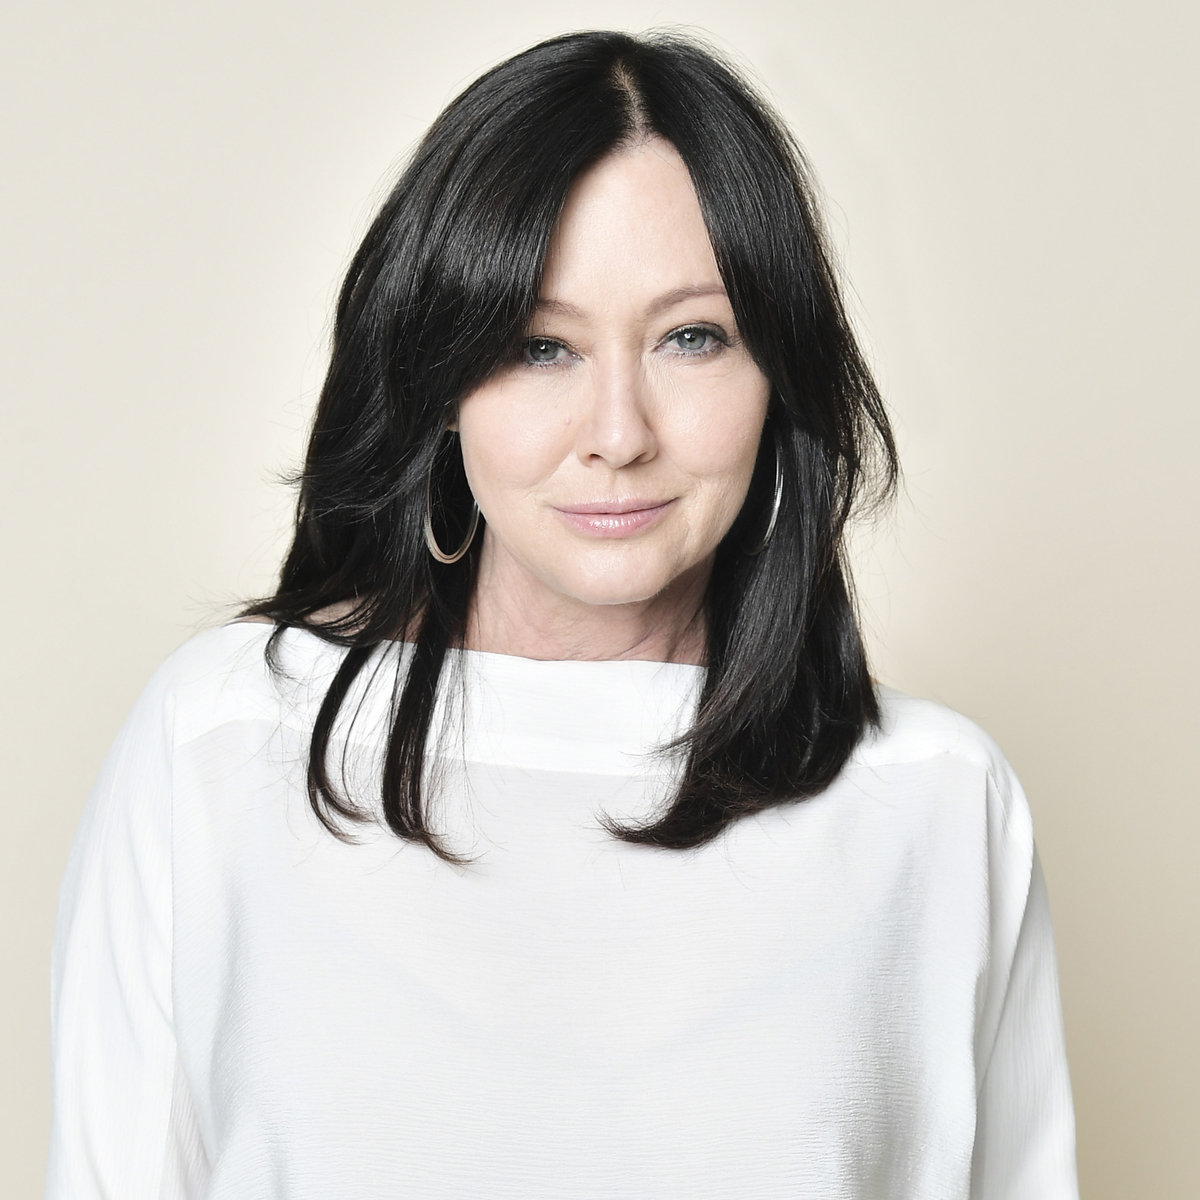 Shannen Doherty’s Cancer Journey, in Her Own Words